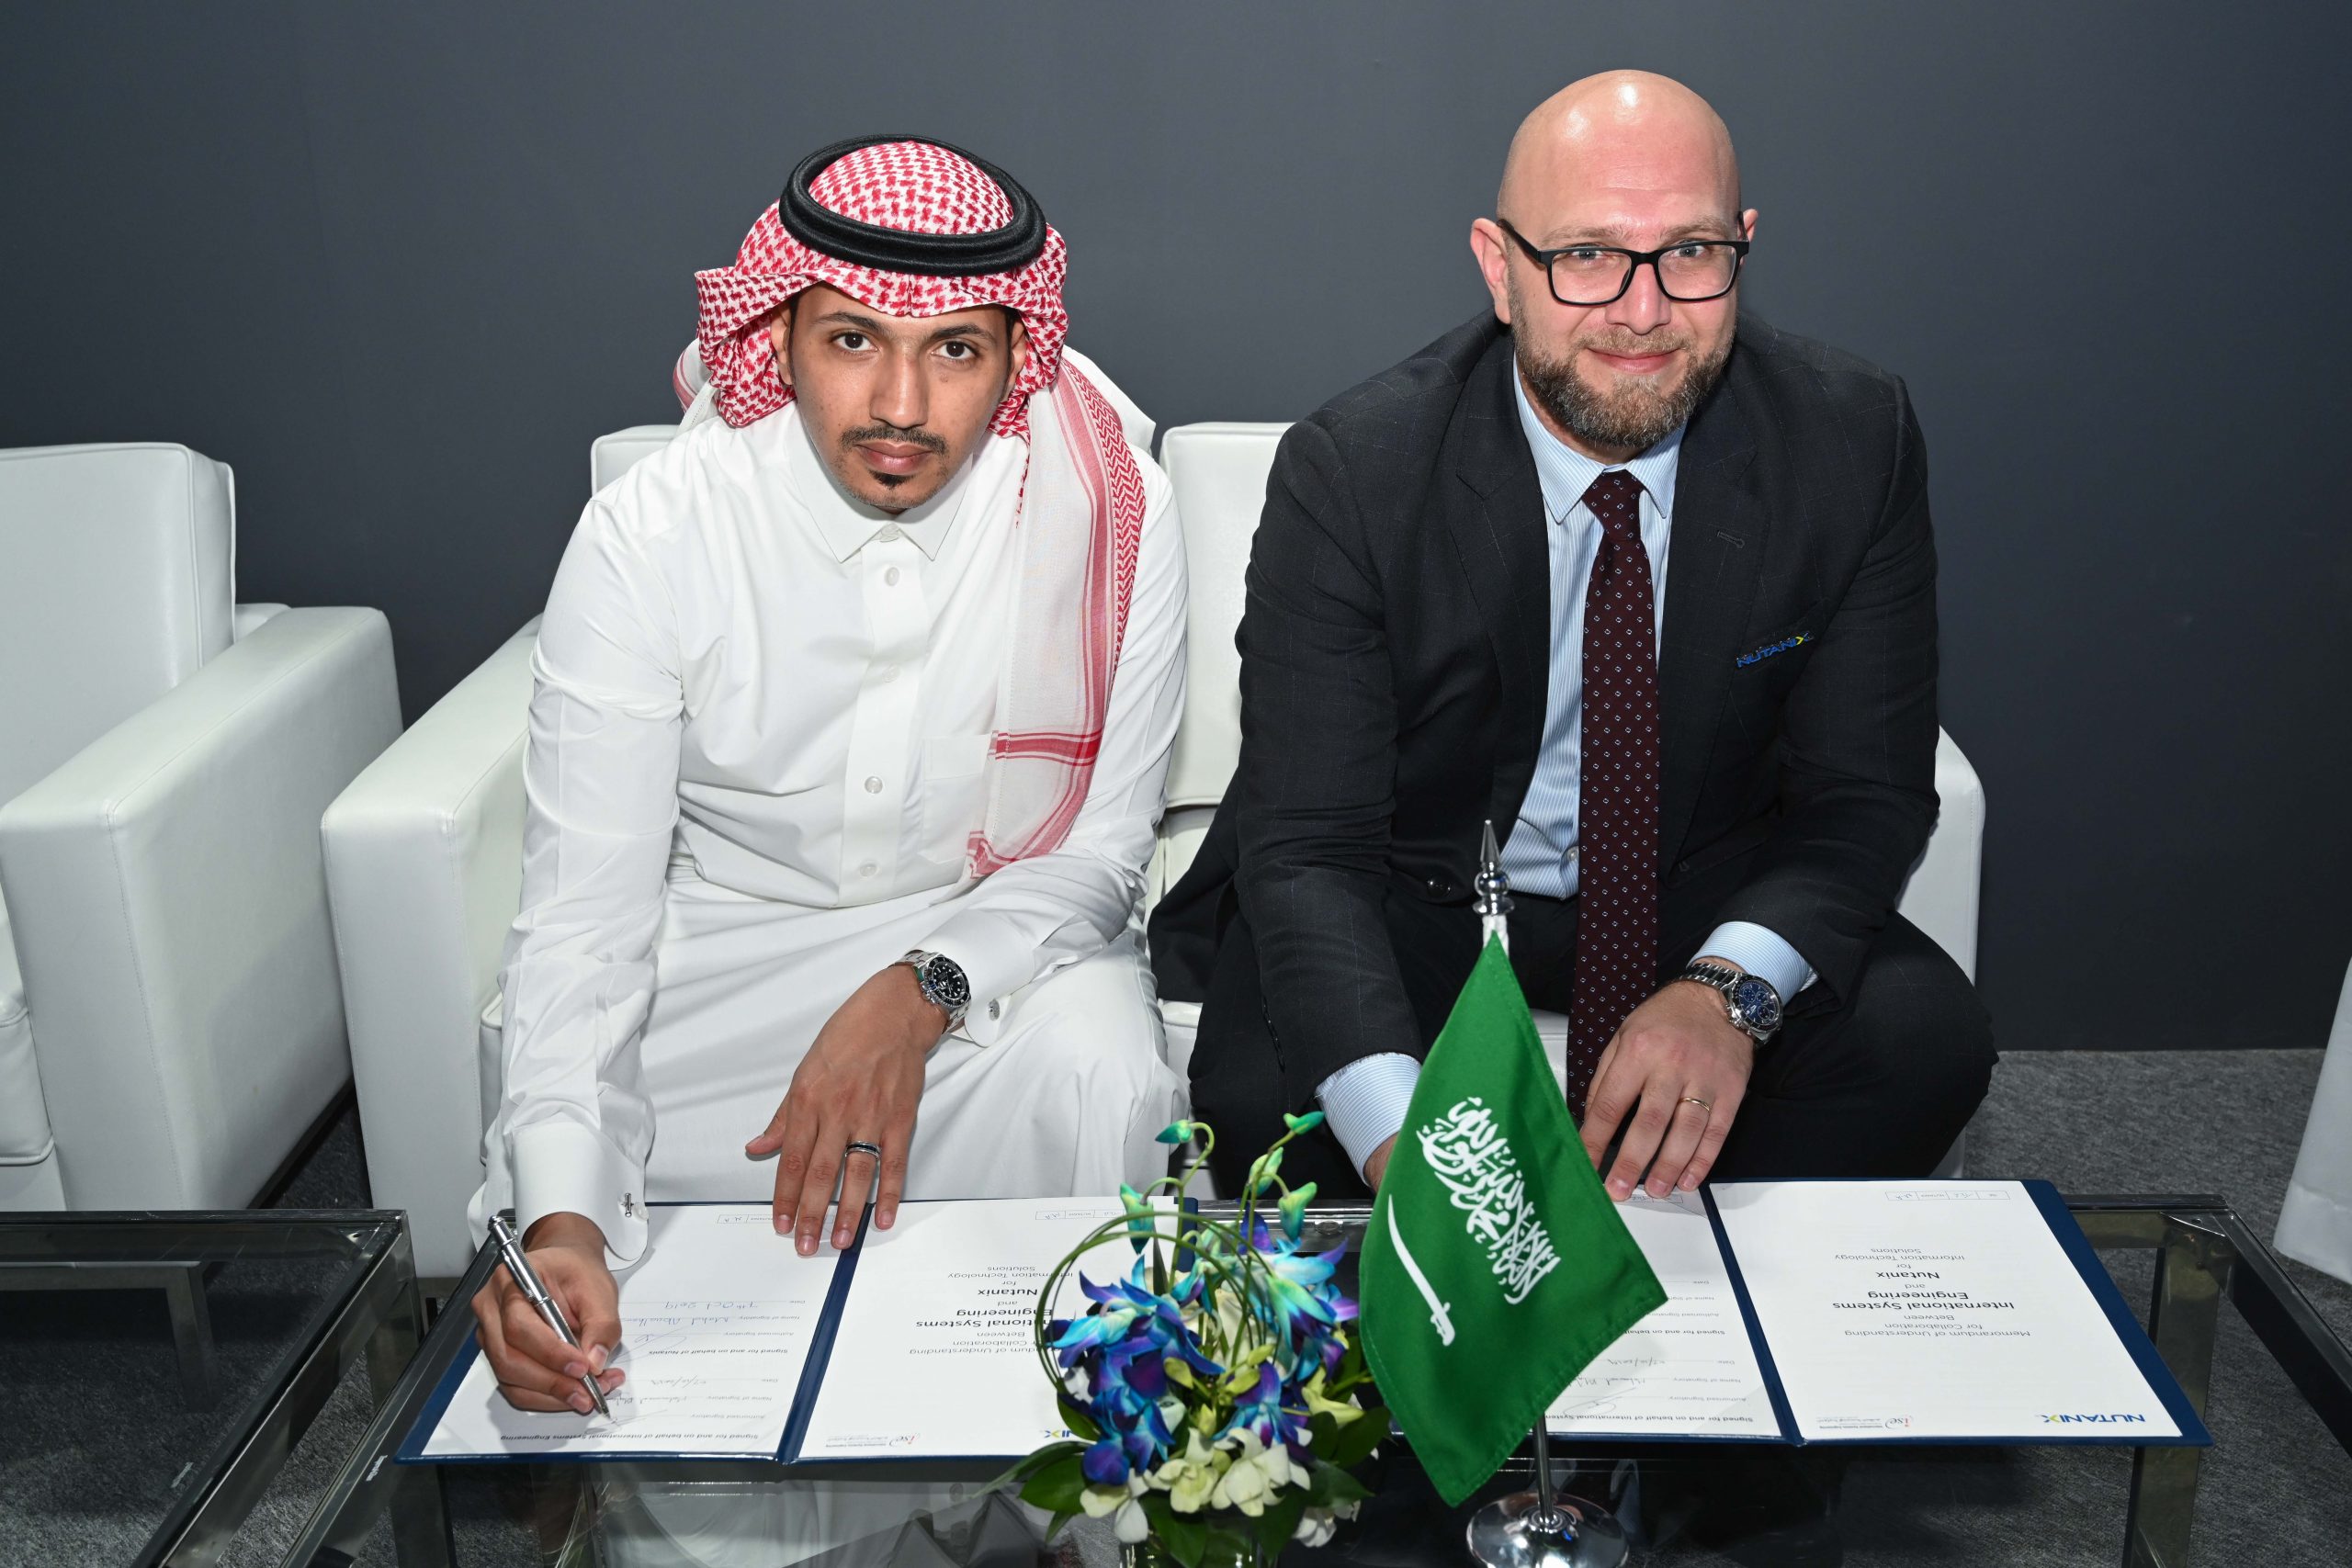 Mohammed Alghailani, ISE and Mohammad Abulhouf, Nutanix at the MoU signing ceremony